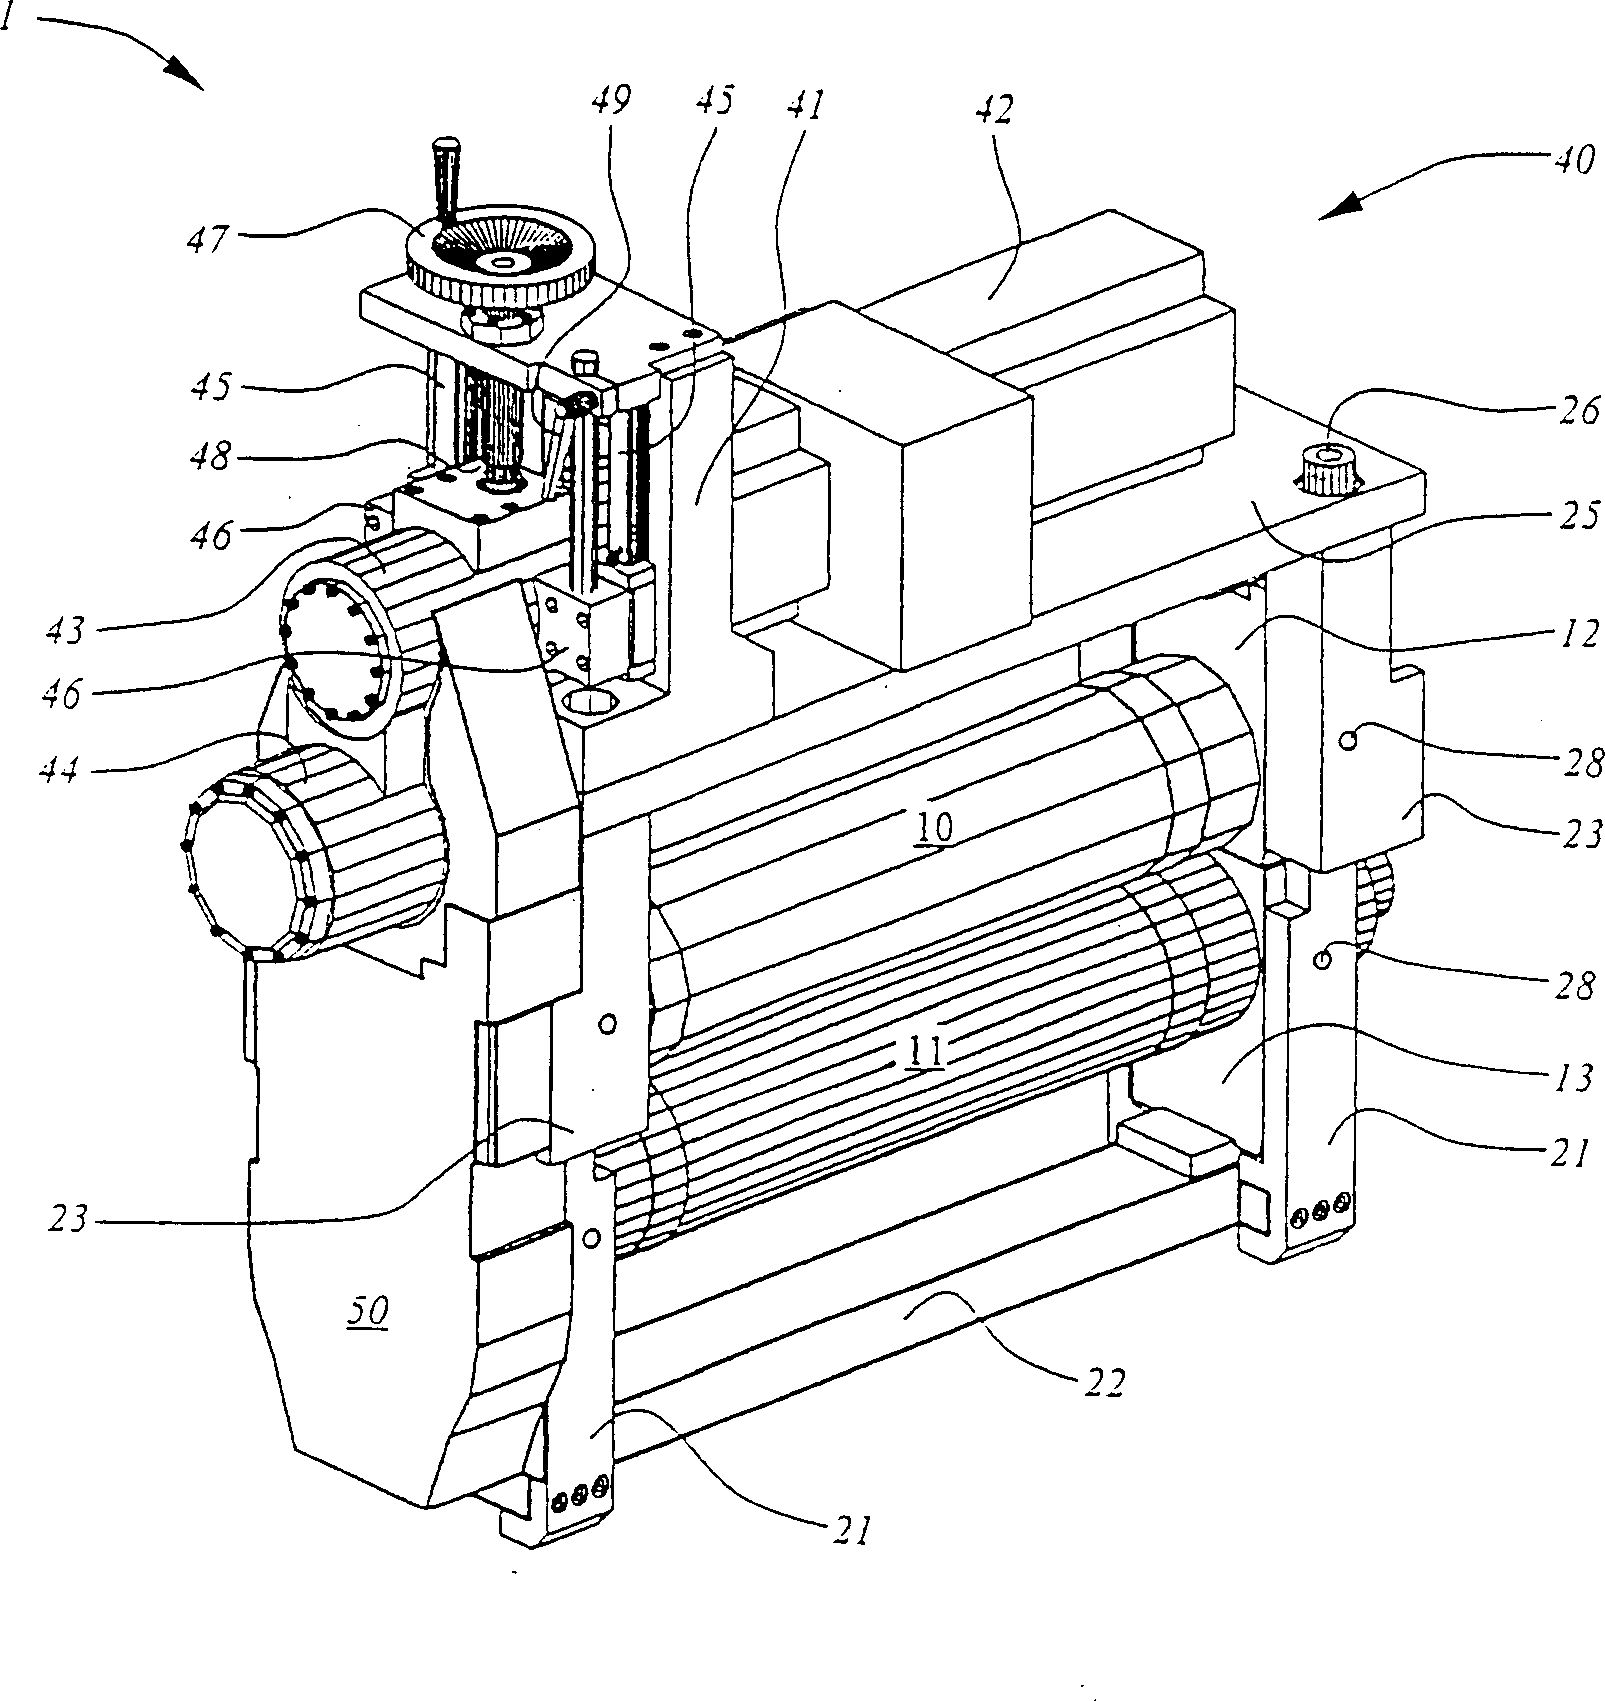 Device for rotary working into coil or piece material